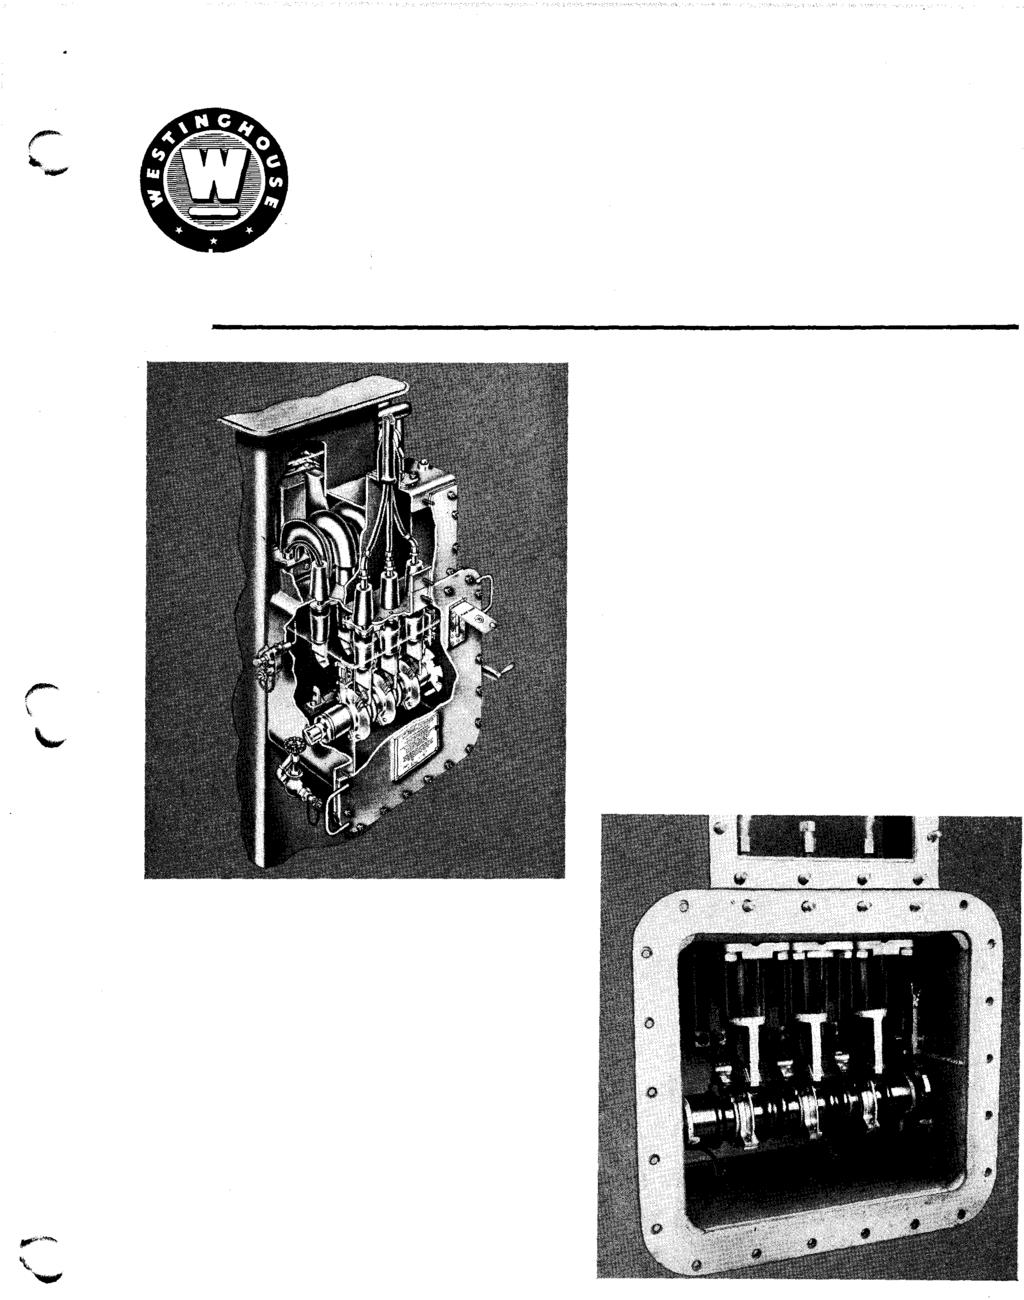 r \ FIG. 1. Cutaway View of Typical Switch. I.L.